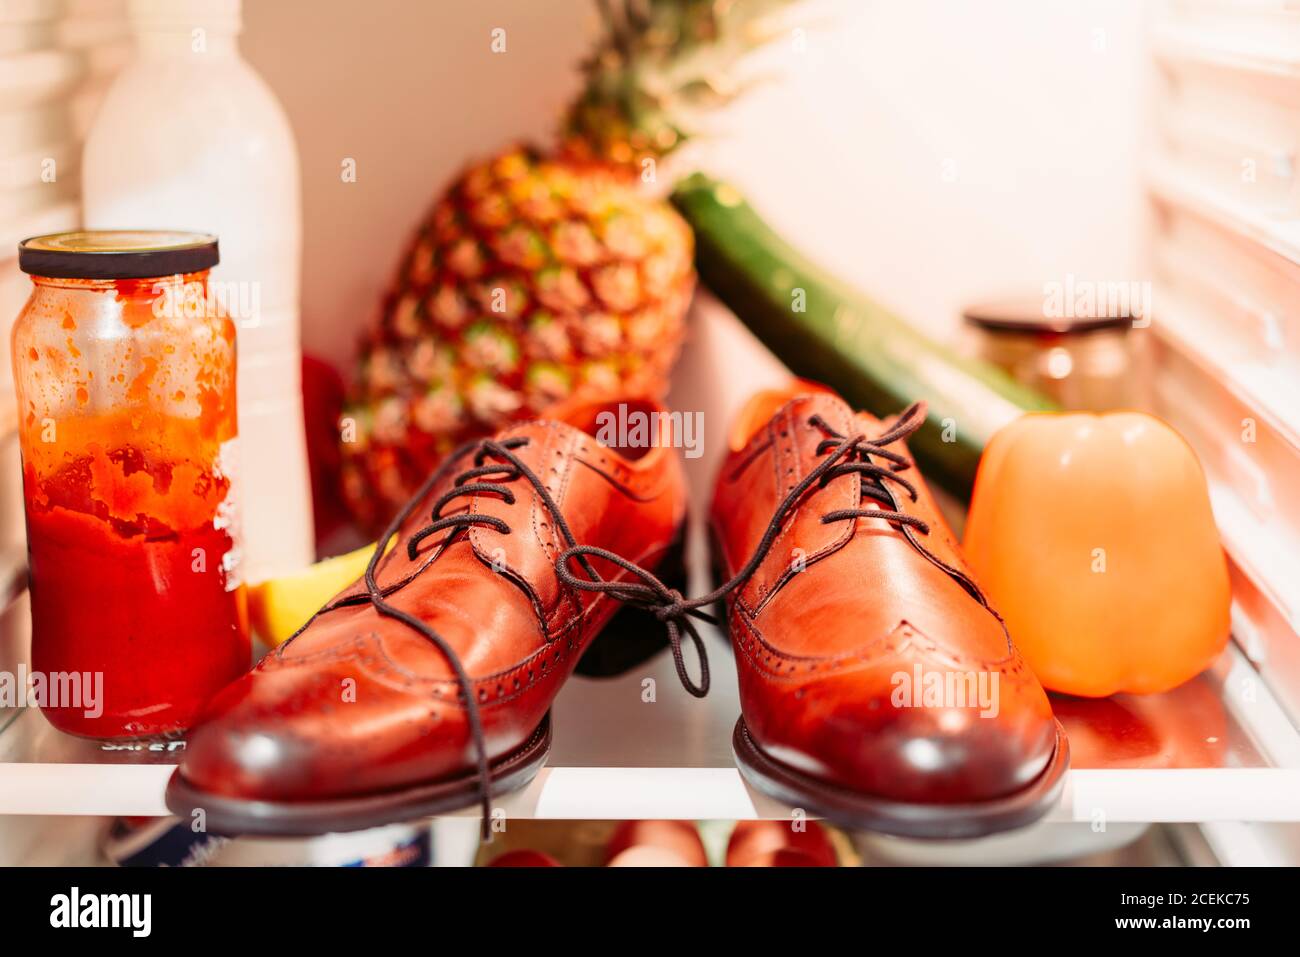 Shoes and food into a refrigerator for fools day Stock Photo